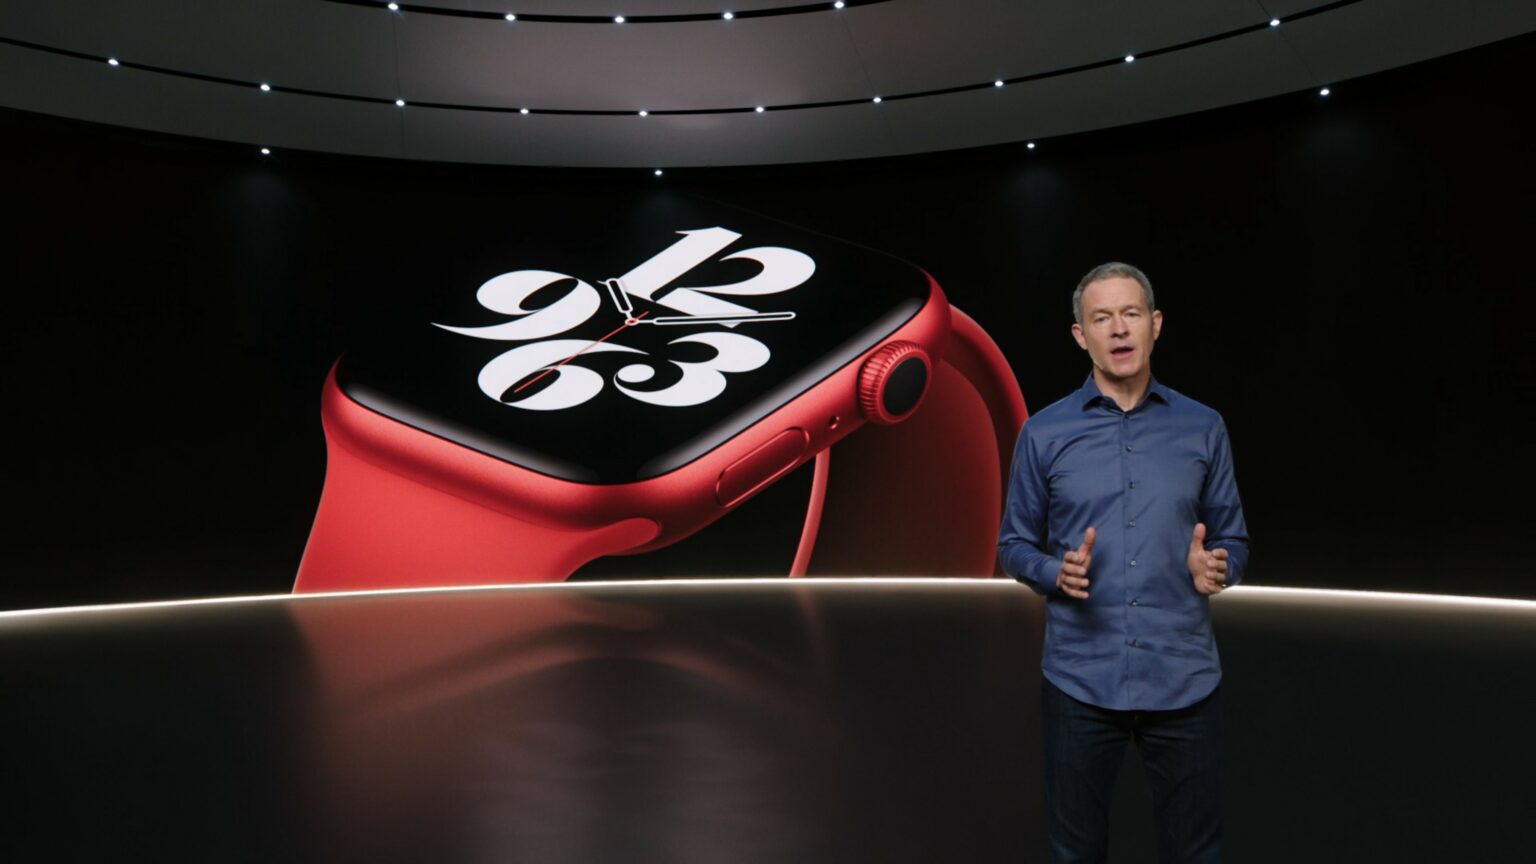 For the first time, there's a Product Red Apple Watch.